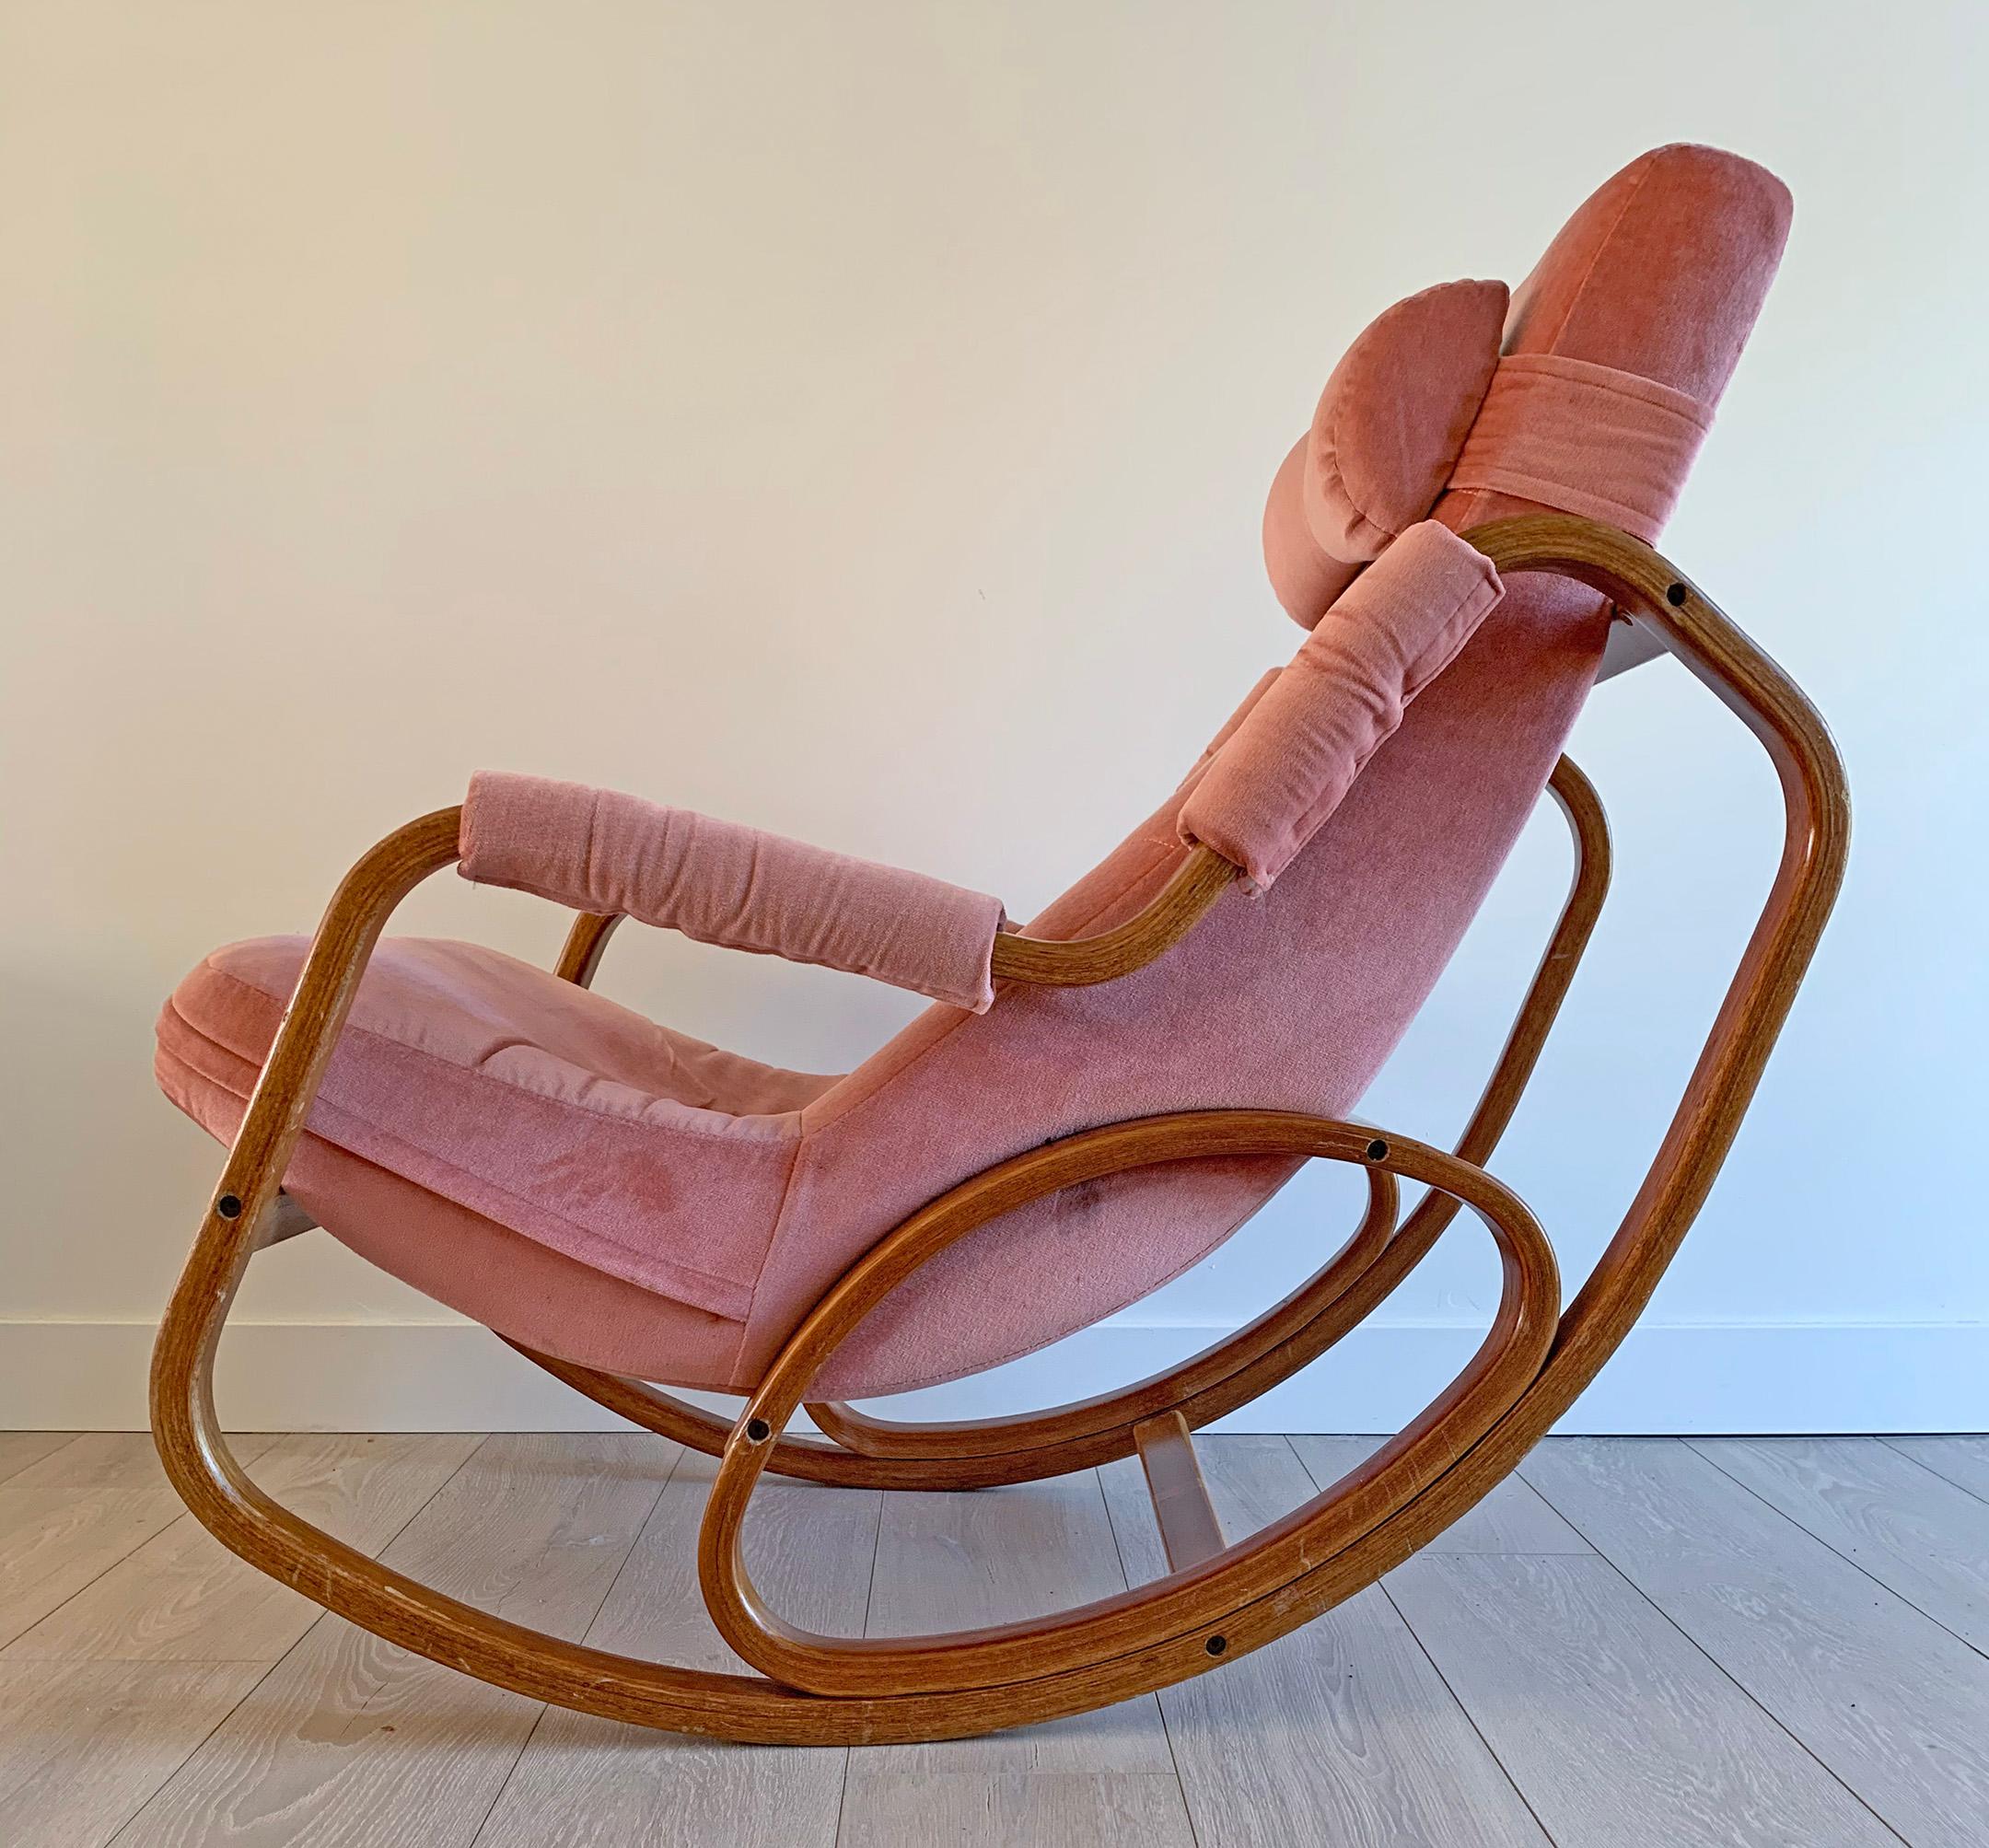 This rocking chair is absolutely stunning! With whimsical round lines and bentwood, this Danish modern lounge chair / rocking chair is a must have. Many people associate bent-wood with Thonet or Josef Hoffmann, and while we have seen a couple other